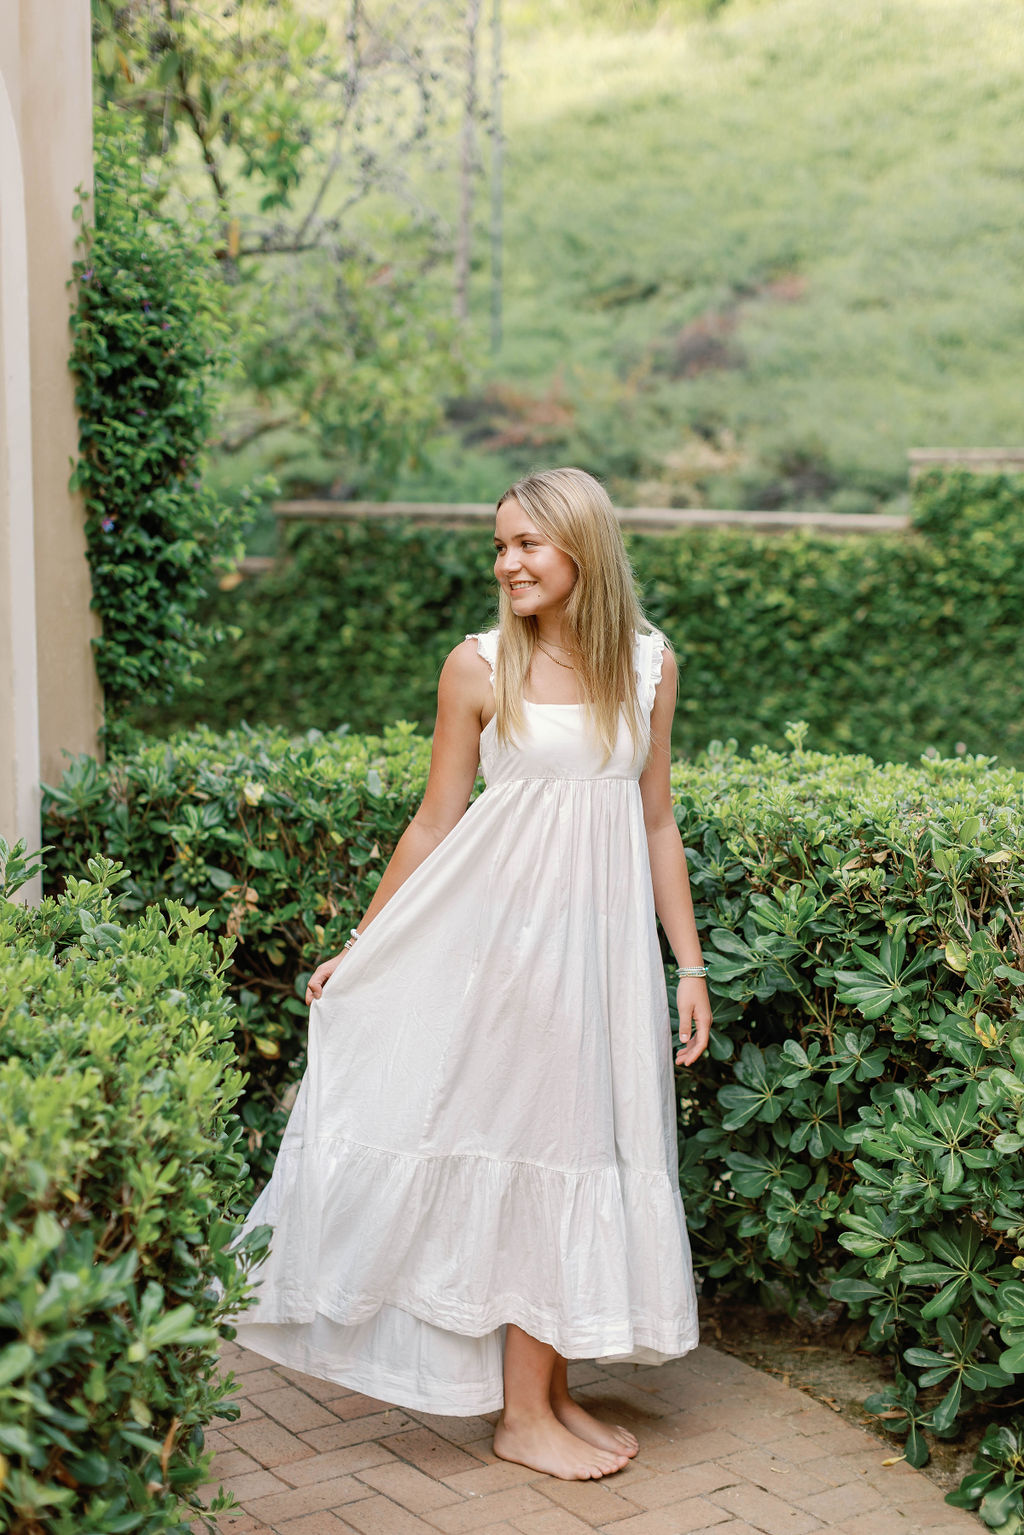 A sibling smiling and in a white dress barefoot for a family photo at Pelican Hill  California.